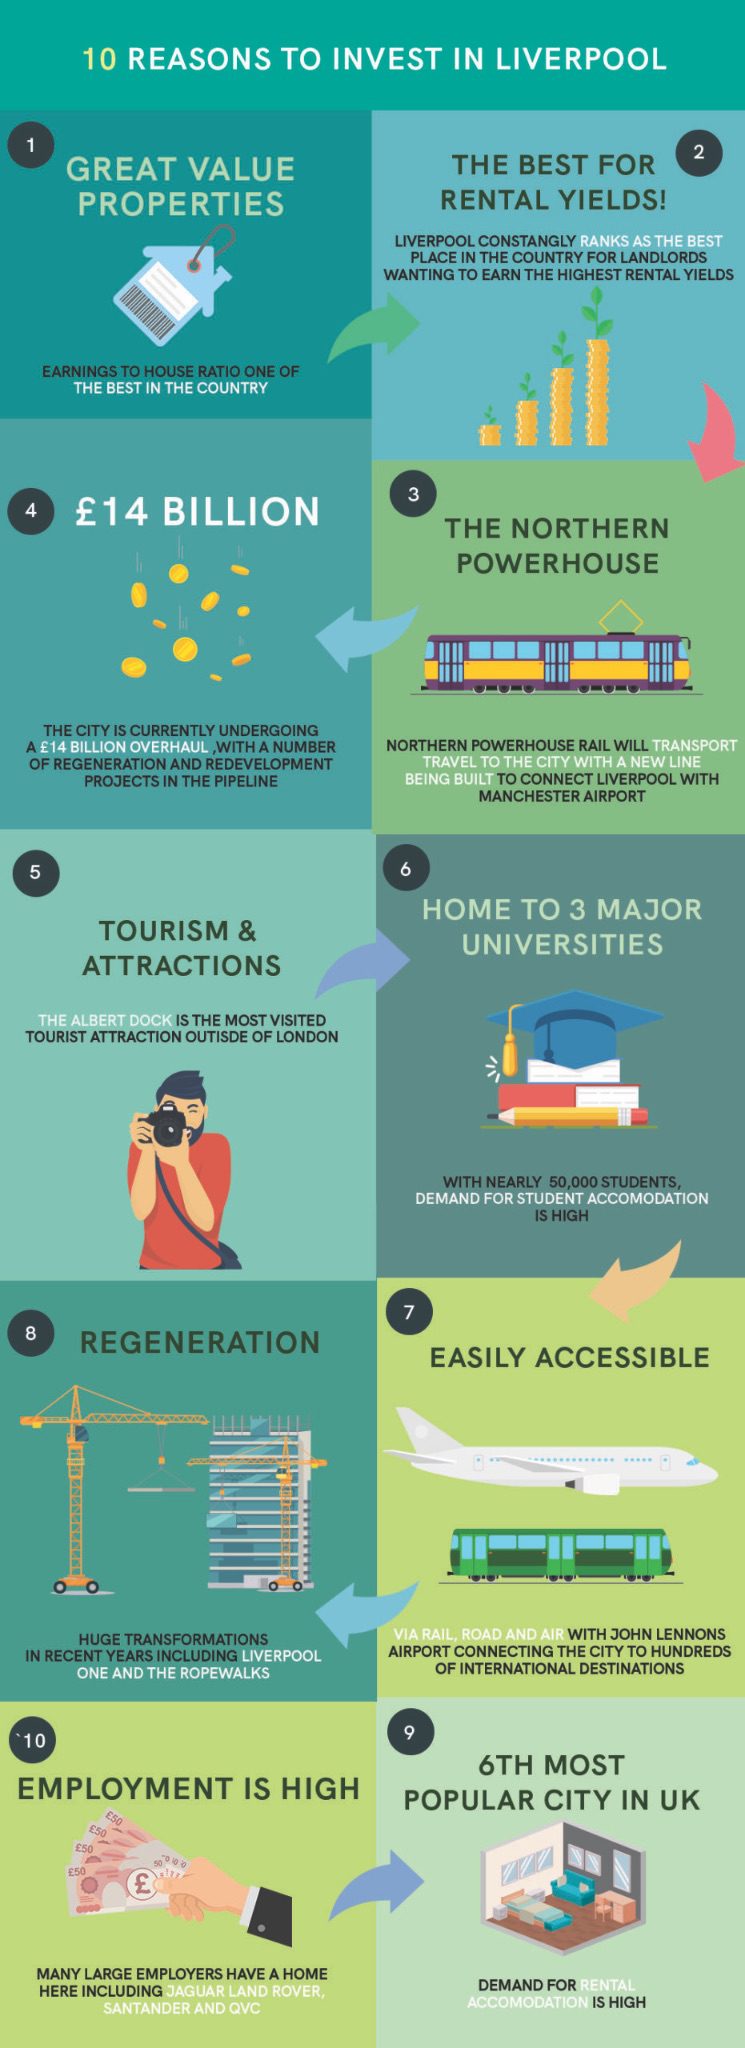 10 Reasons to Invest in Liverpool infographic